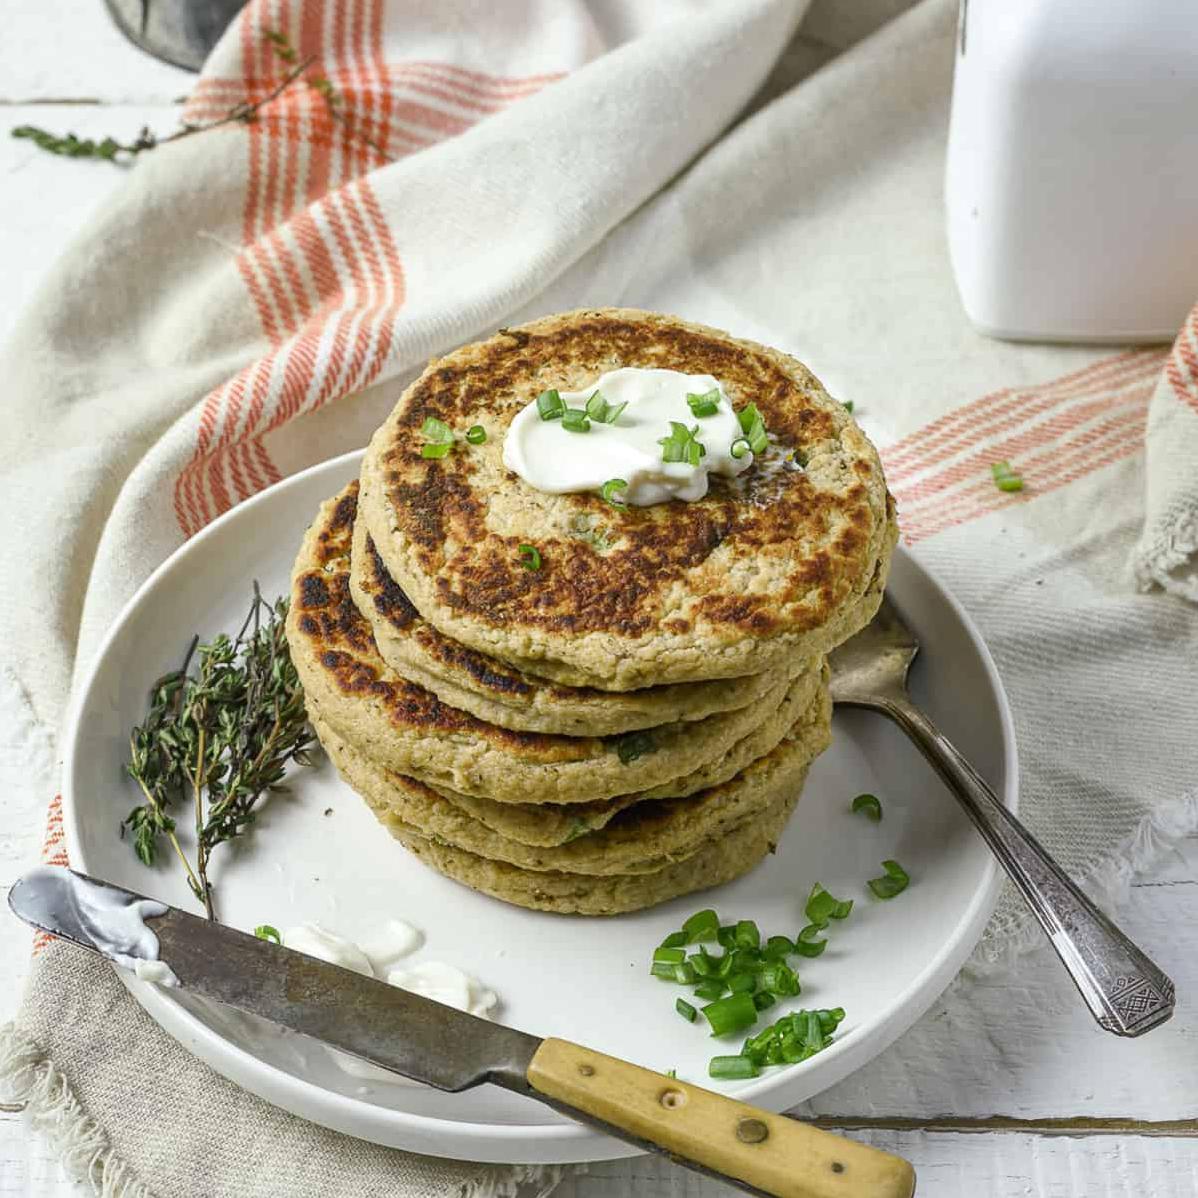  These pancakes are perfect for a weekend brunch or quick dinner that satisfies your craving while keeping you healthy and light.